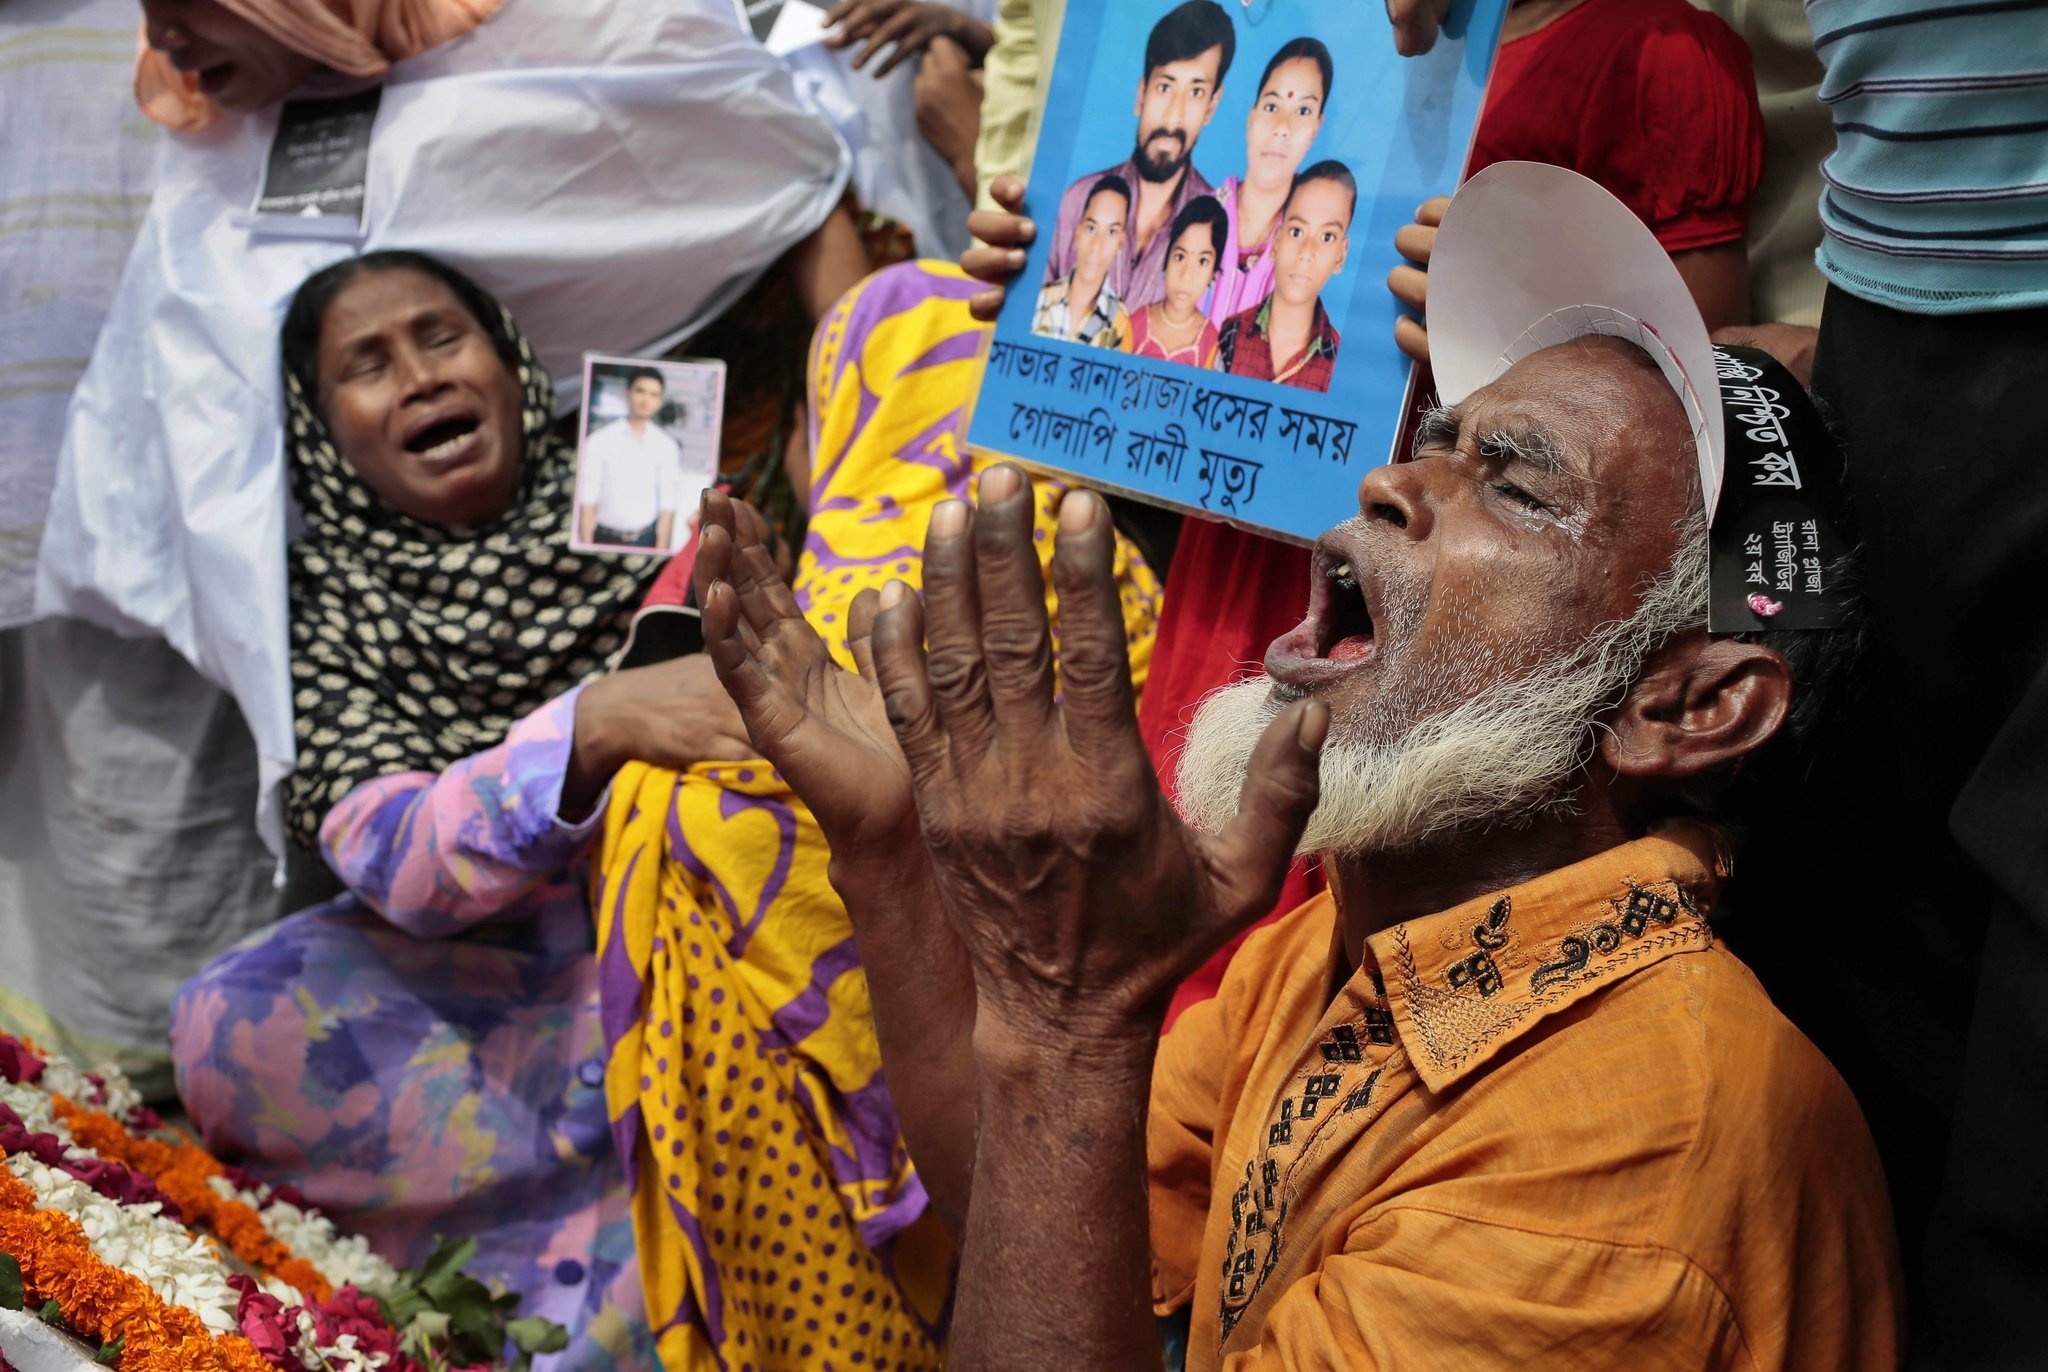 Bangladesh garment factory collapse remembered in protests 2 years later